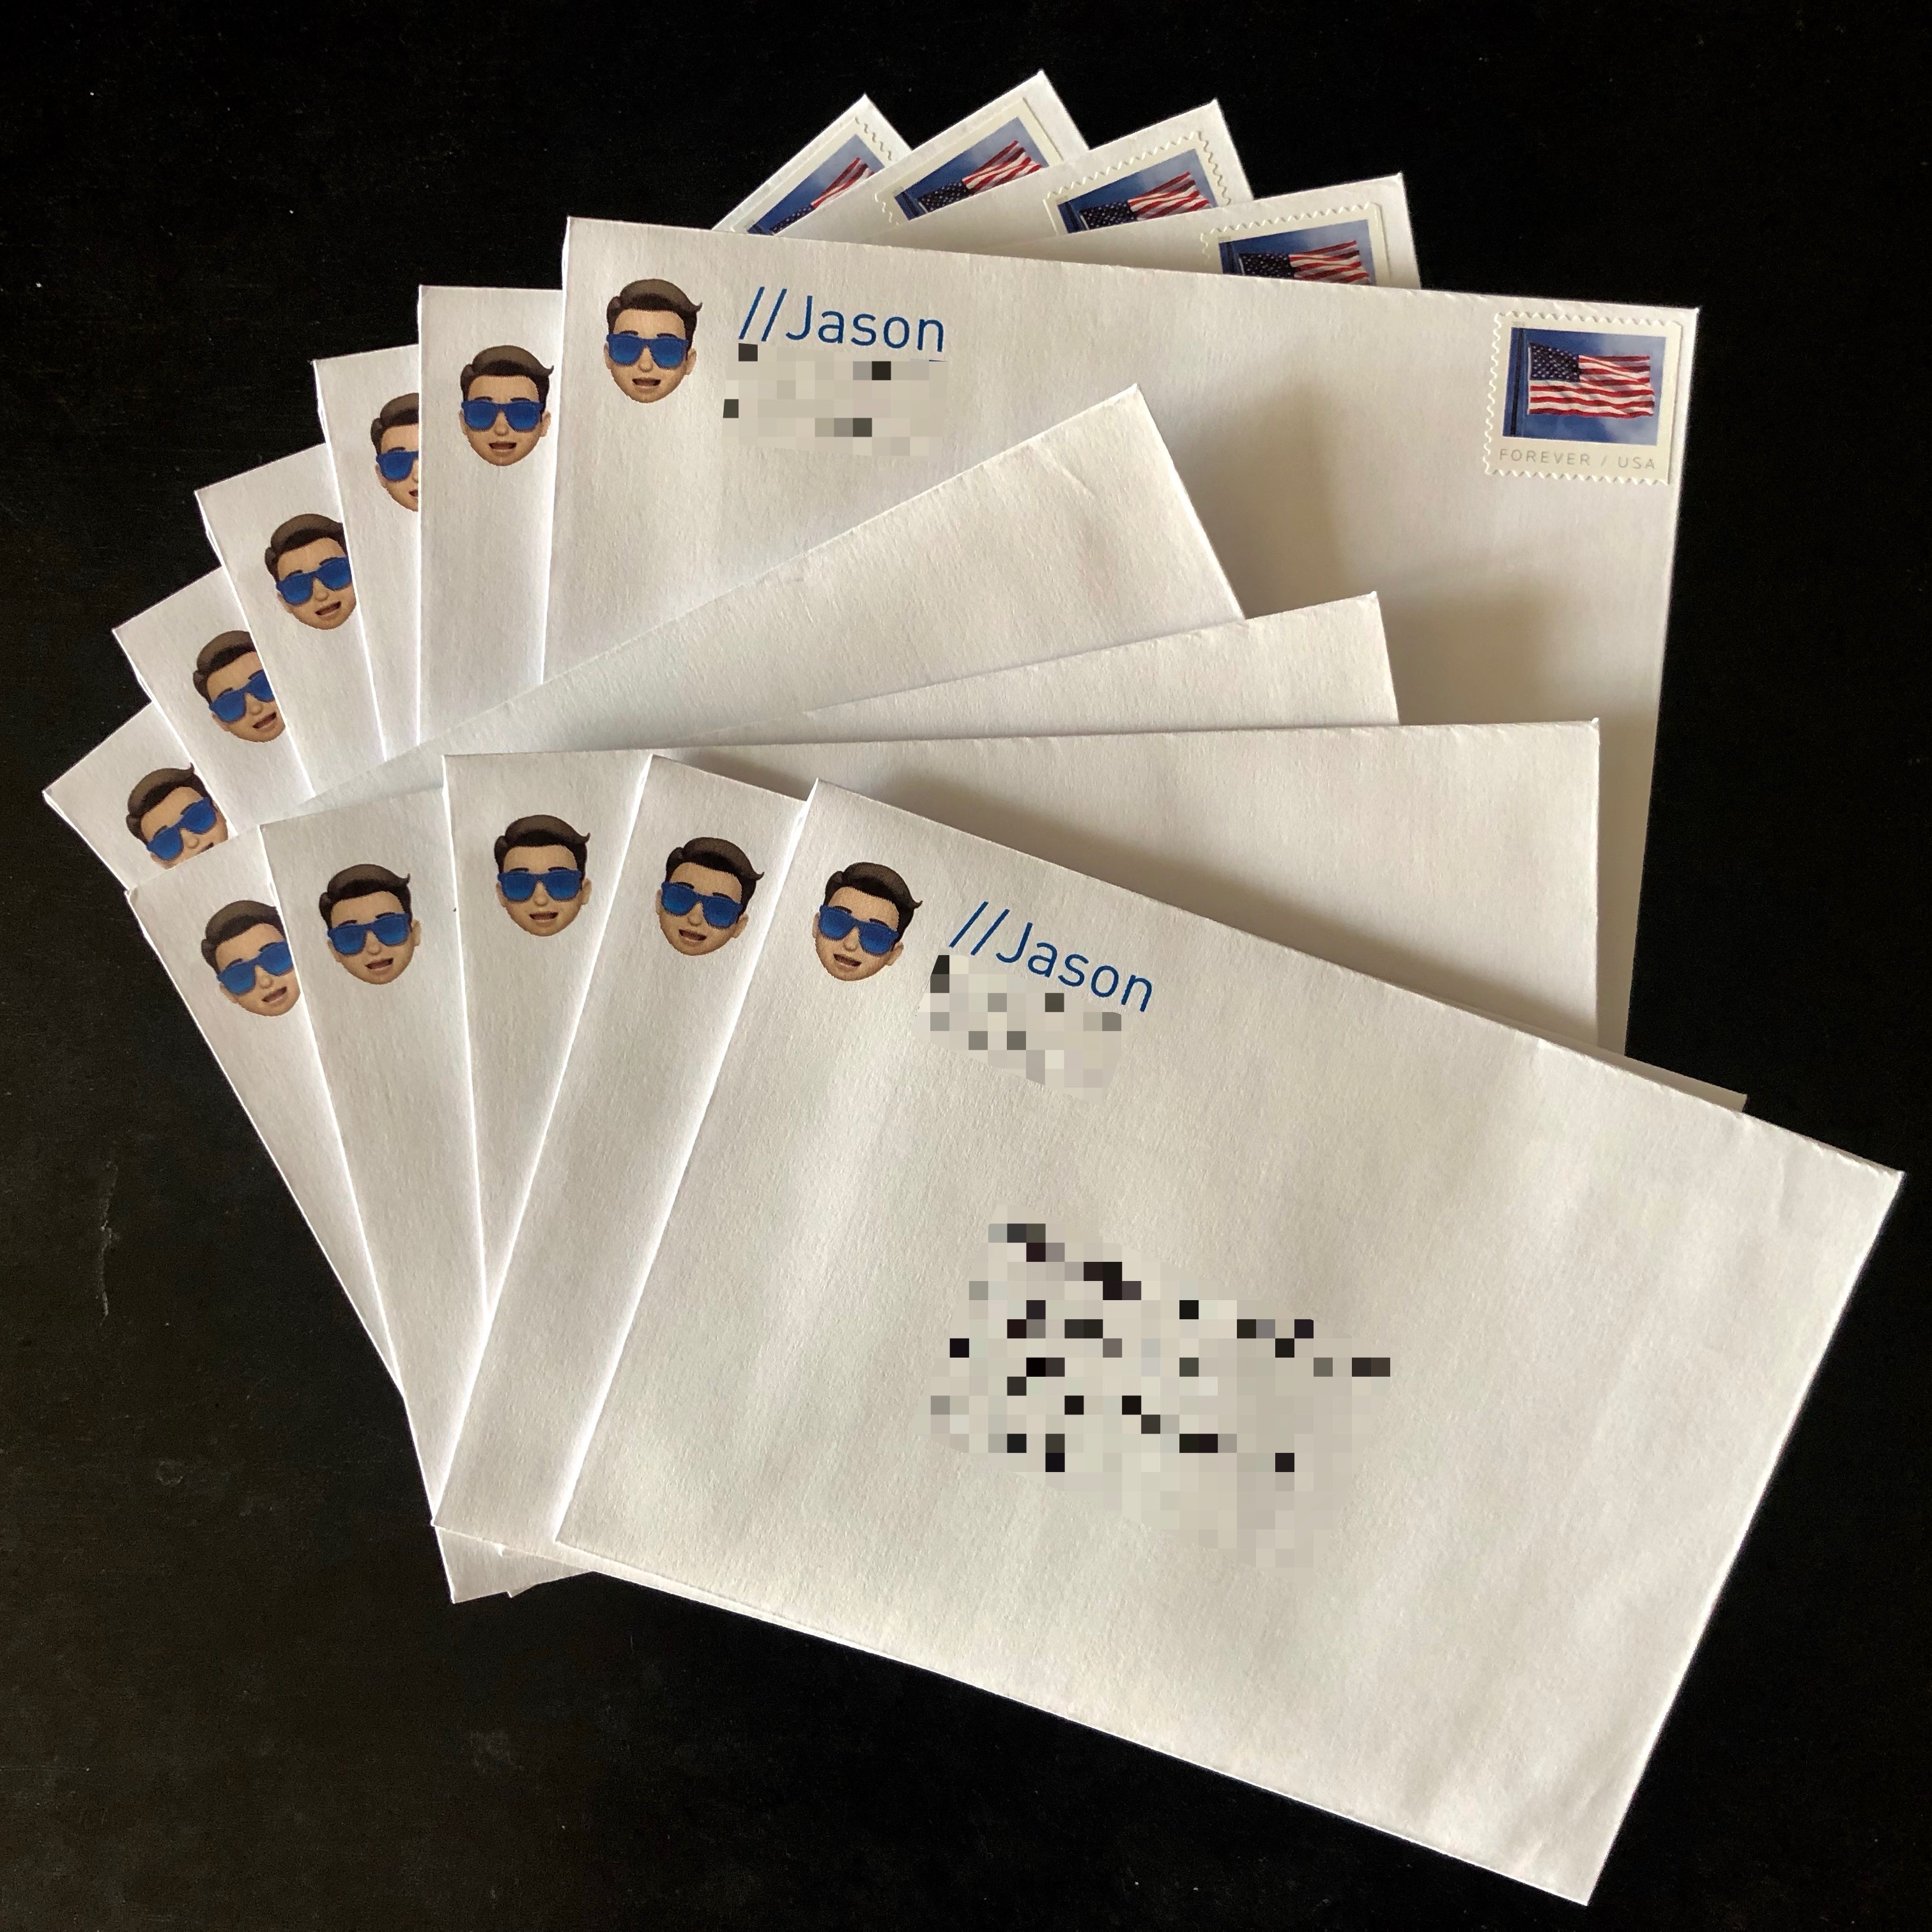 Micro.blog WWDC19 Stickers being mailed